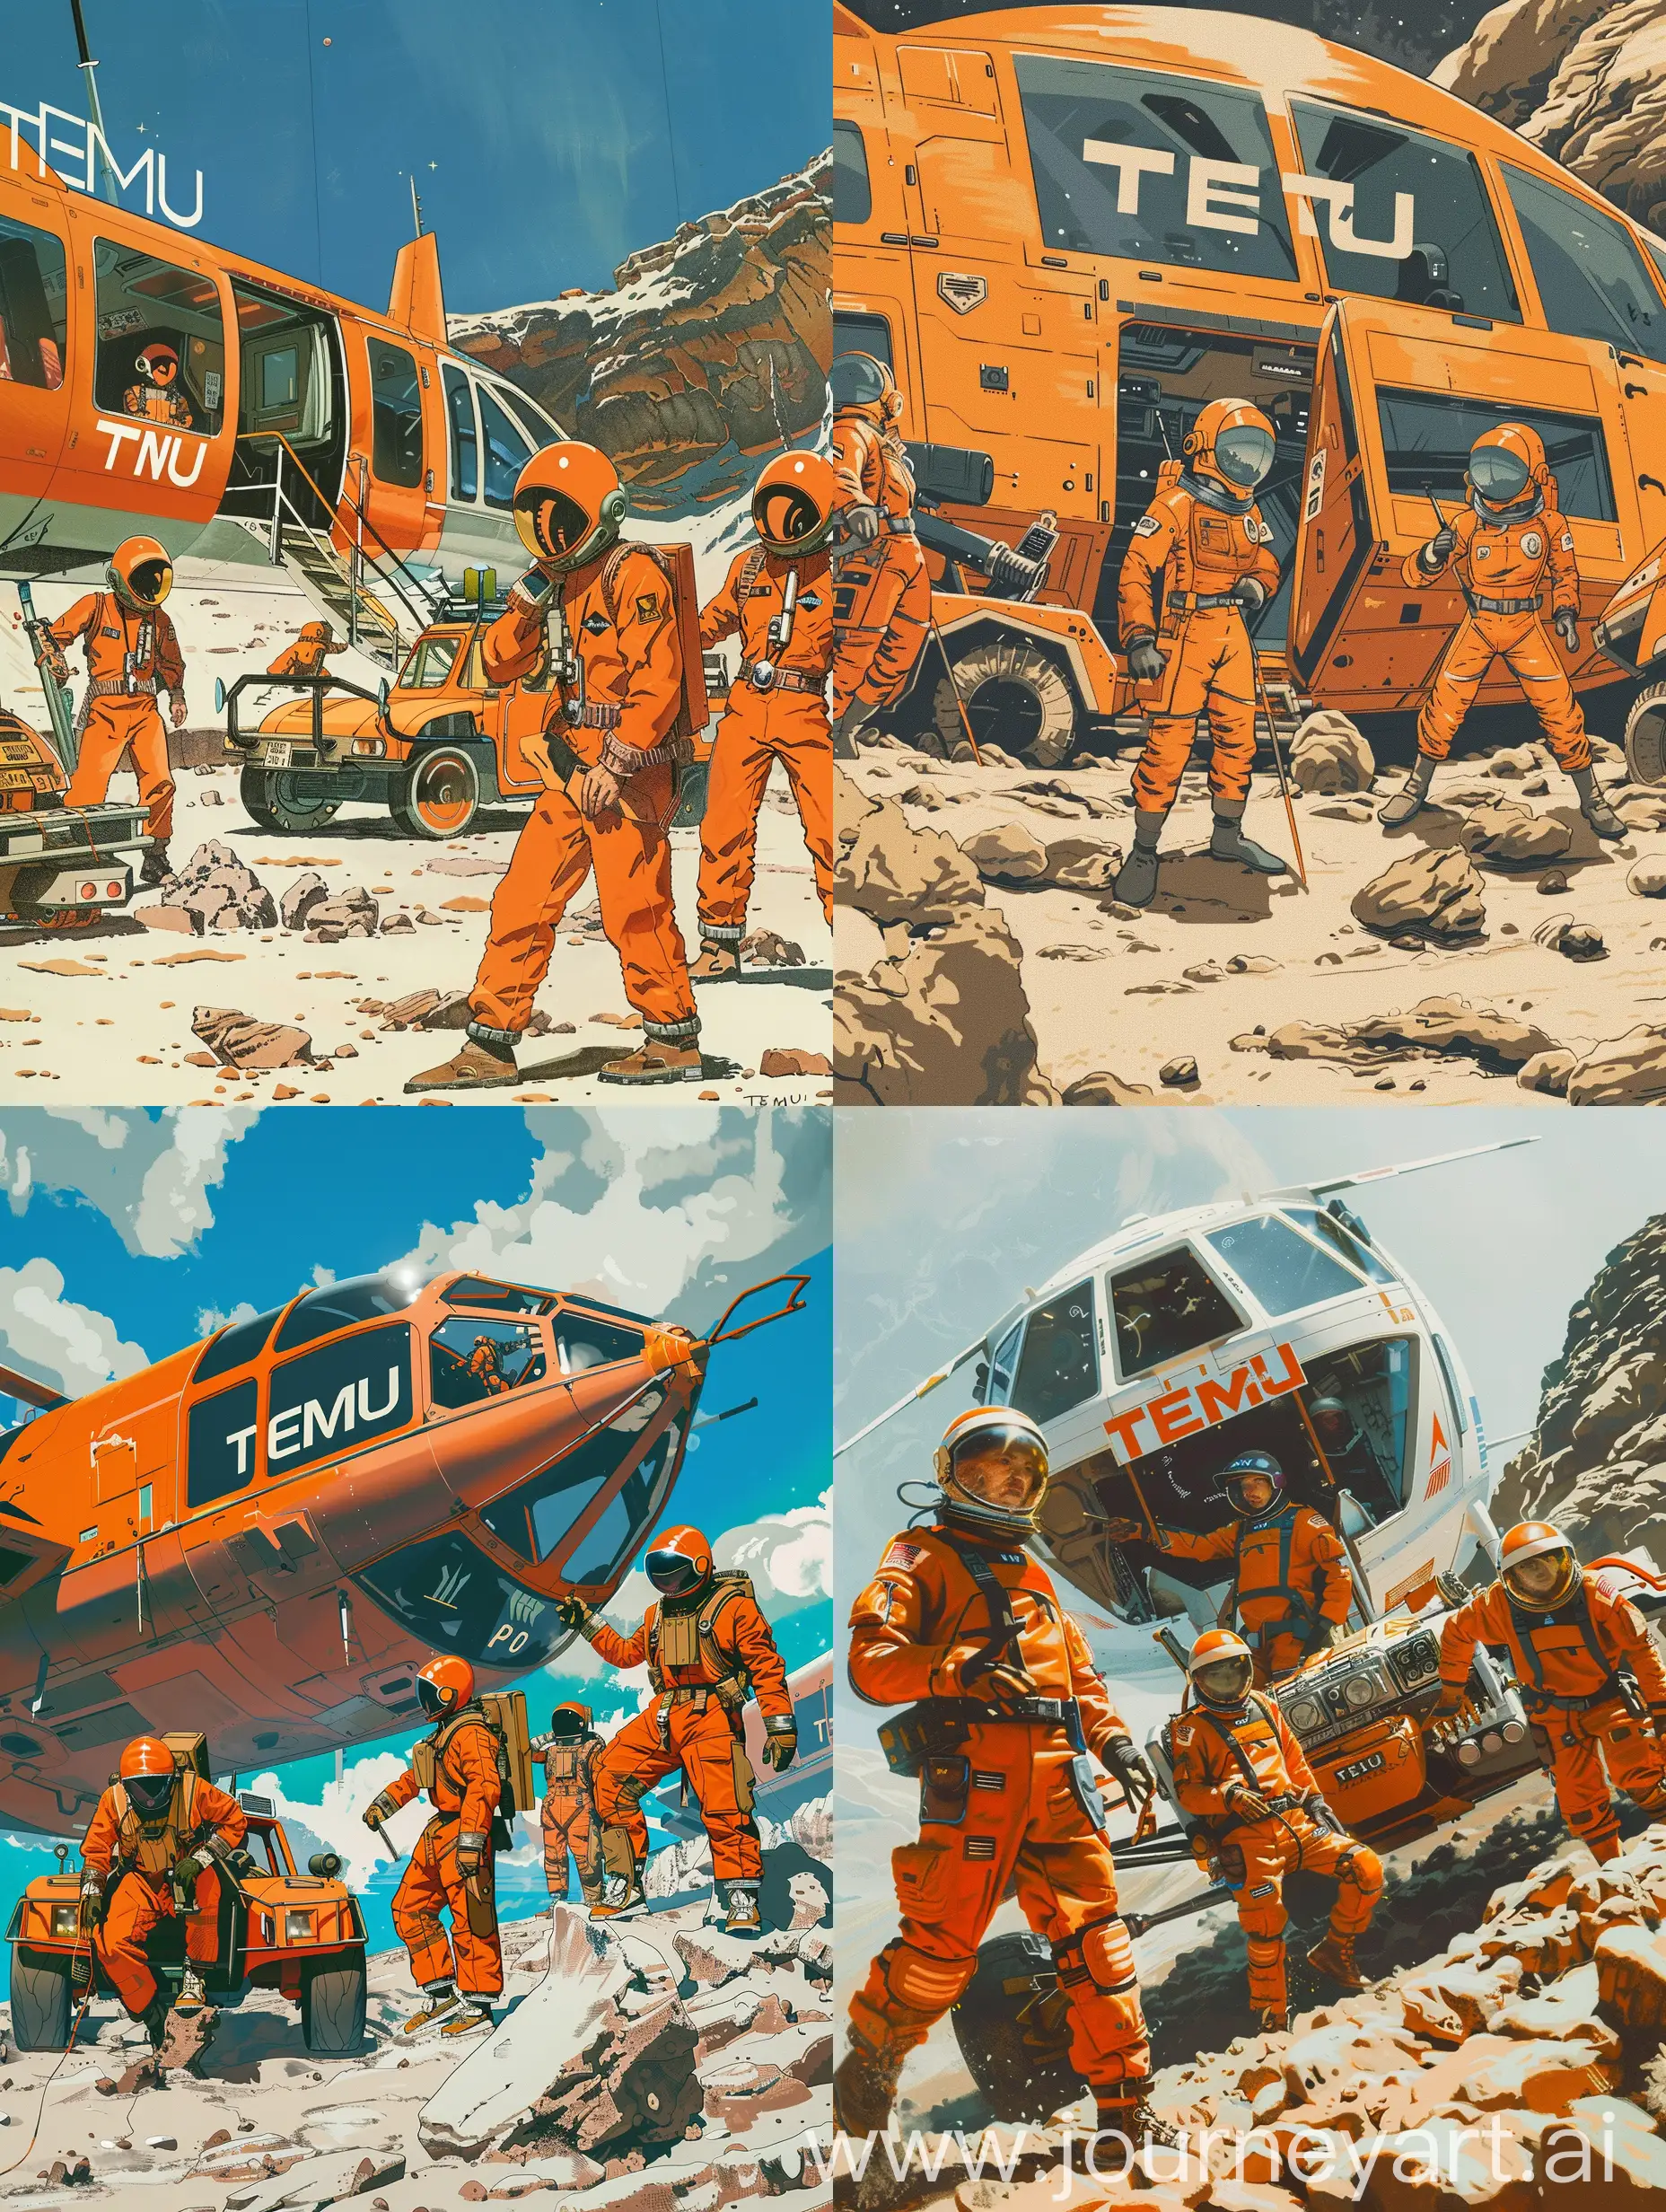 A team of futuristic space explorers on the surface of an unknown planet, disembarking from their TEMU branded spaceship and prepping for an exploration mission, orange uniforms and vehicles, retro anime style